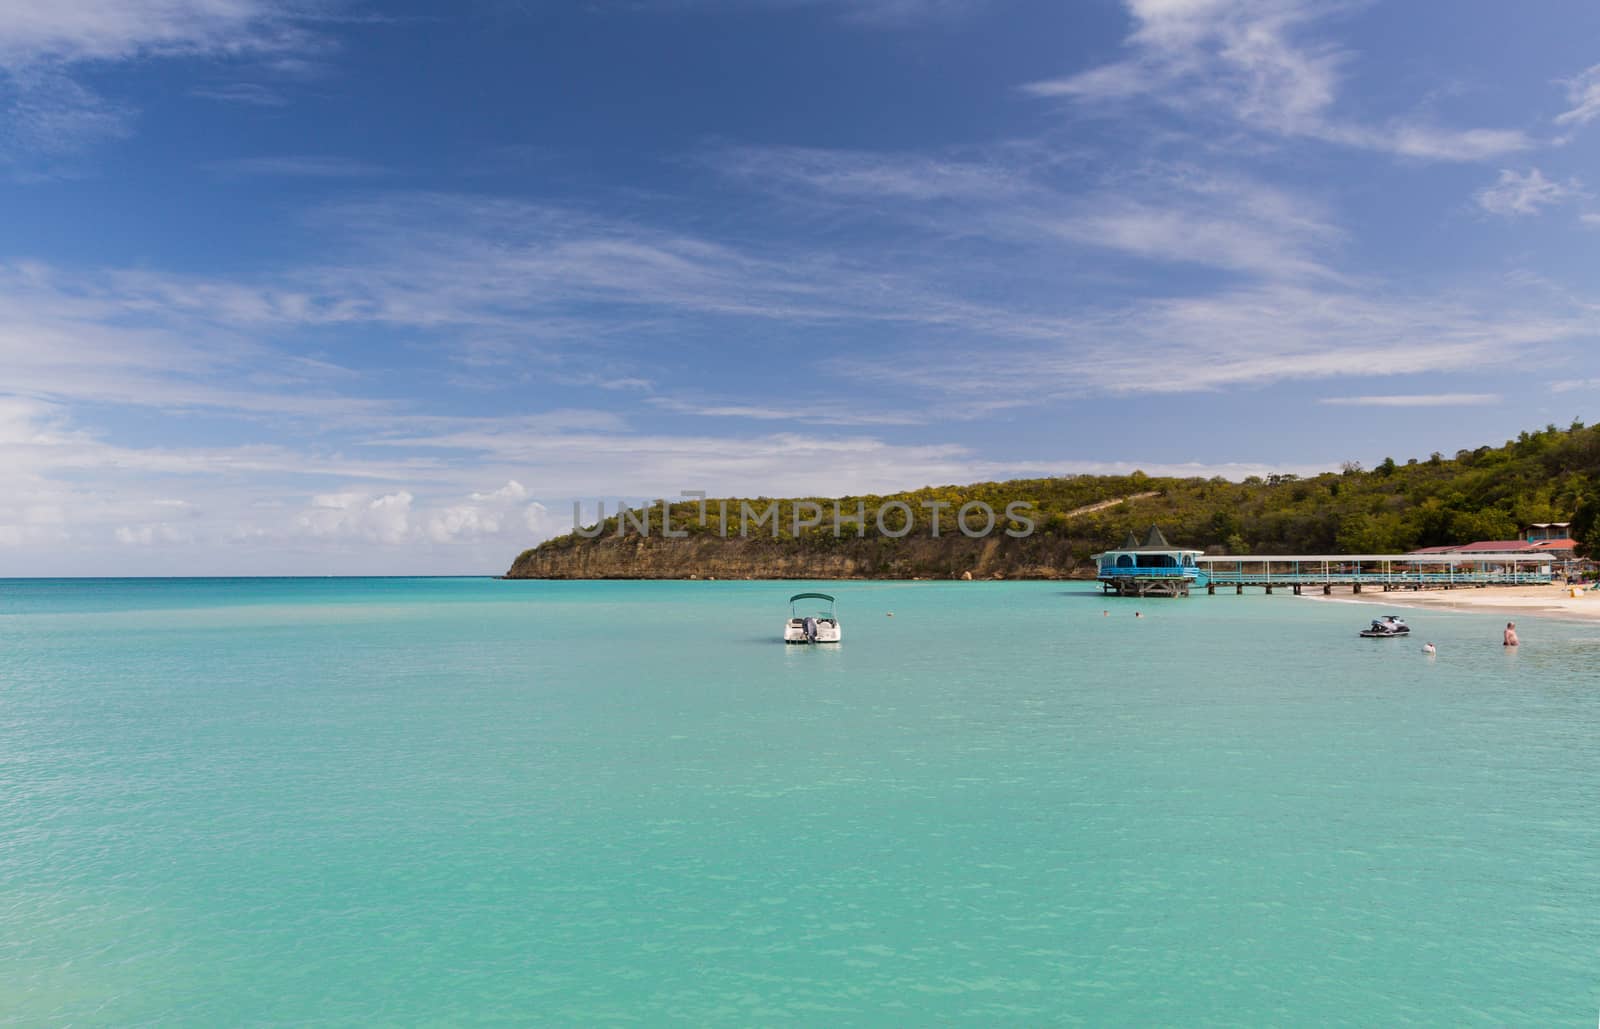 Summer in Antigua by chrisukphoto